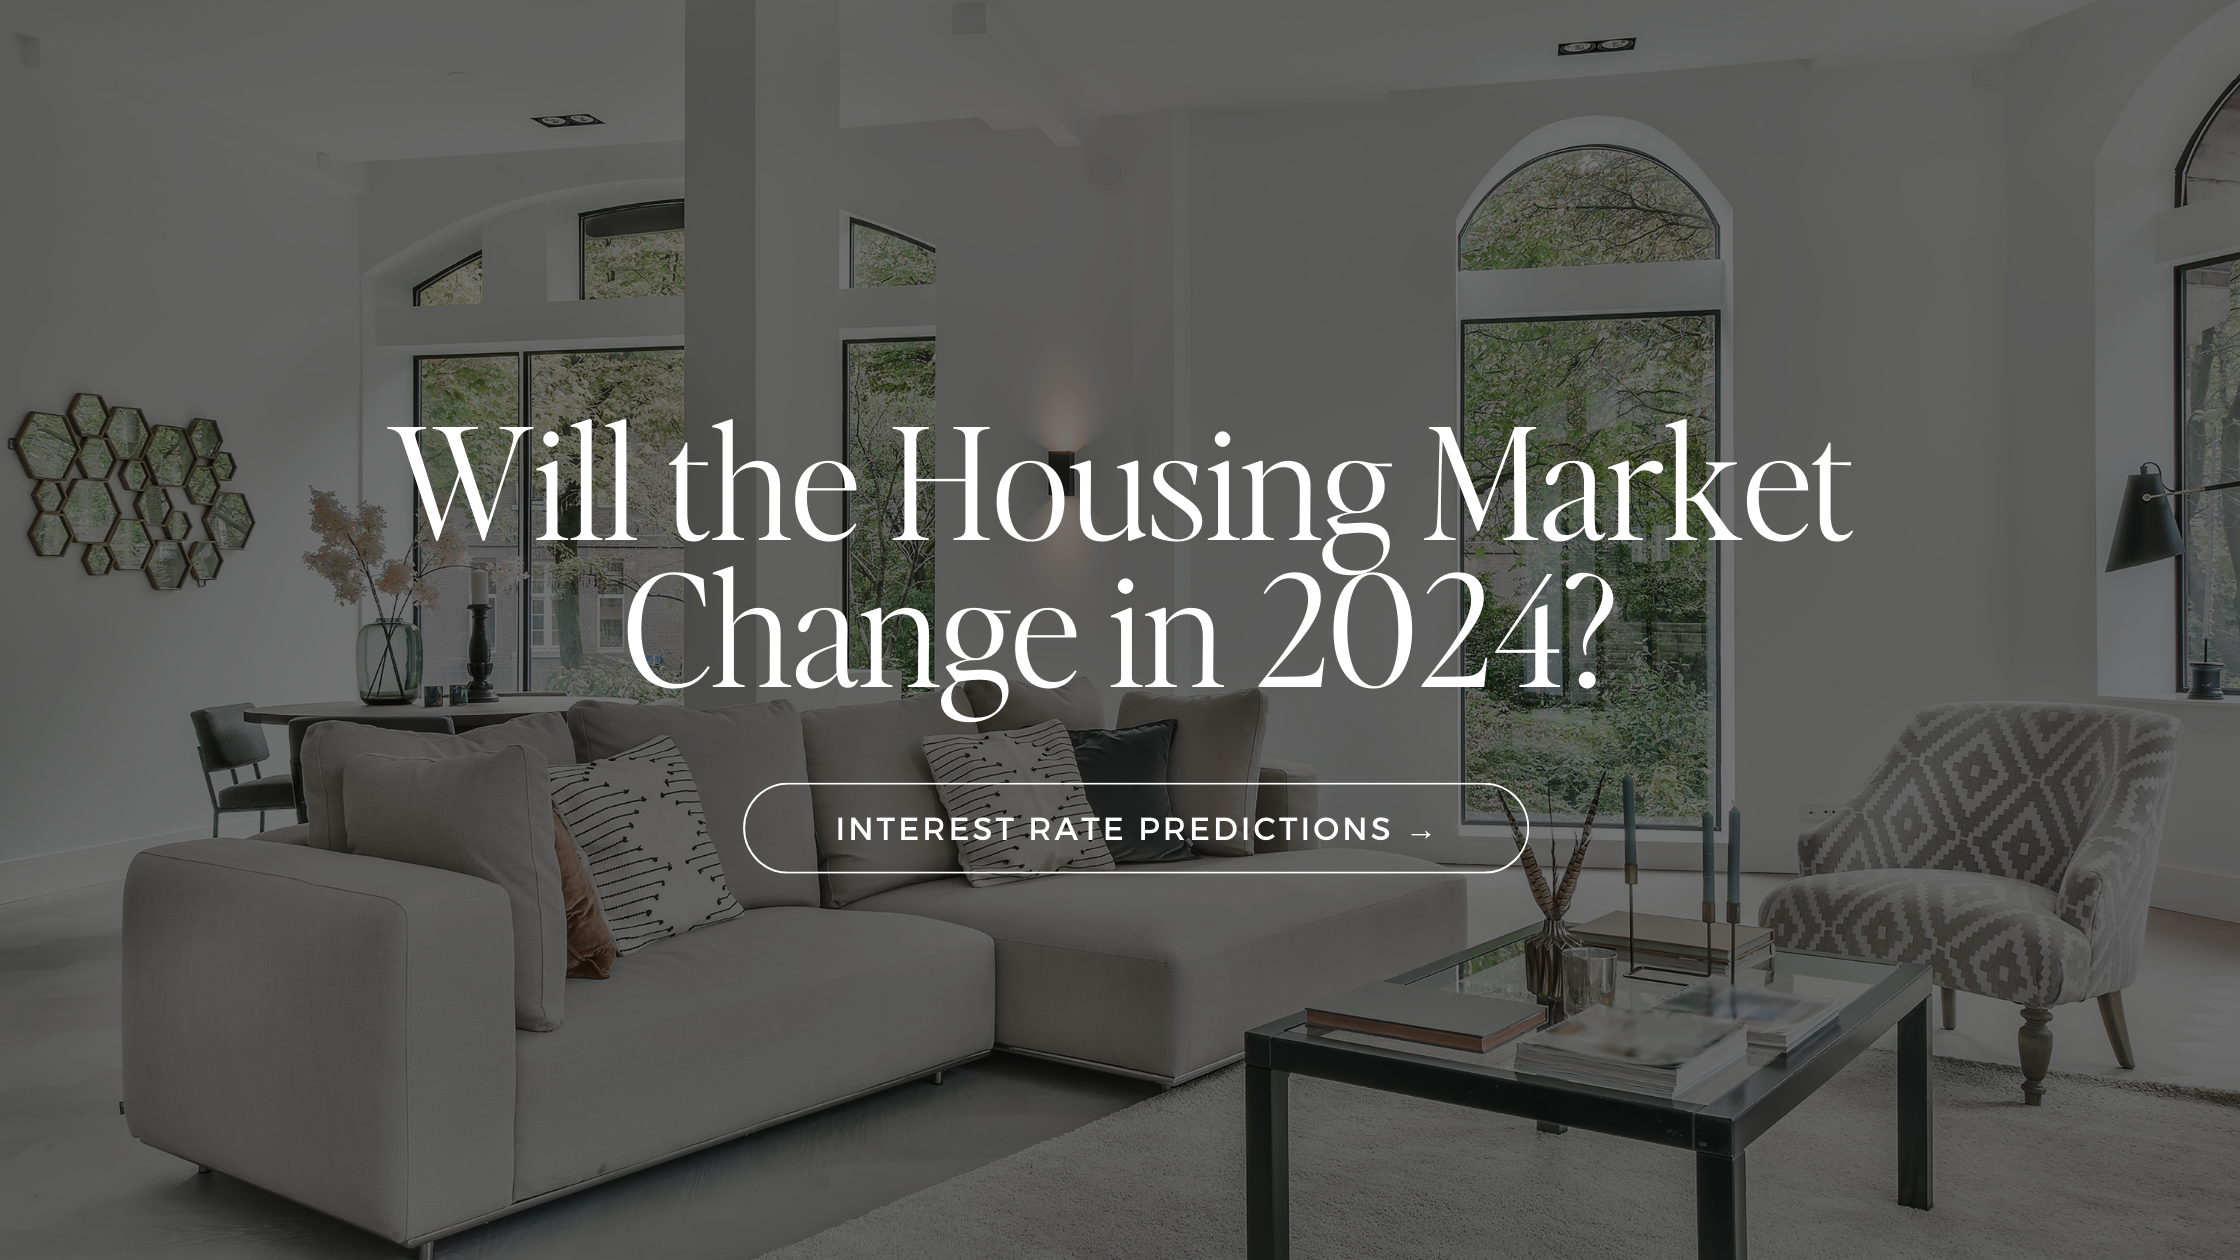 Will the Housing Market Change in 2024?